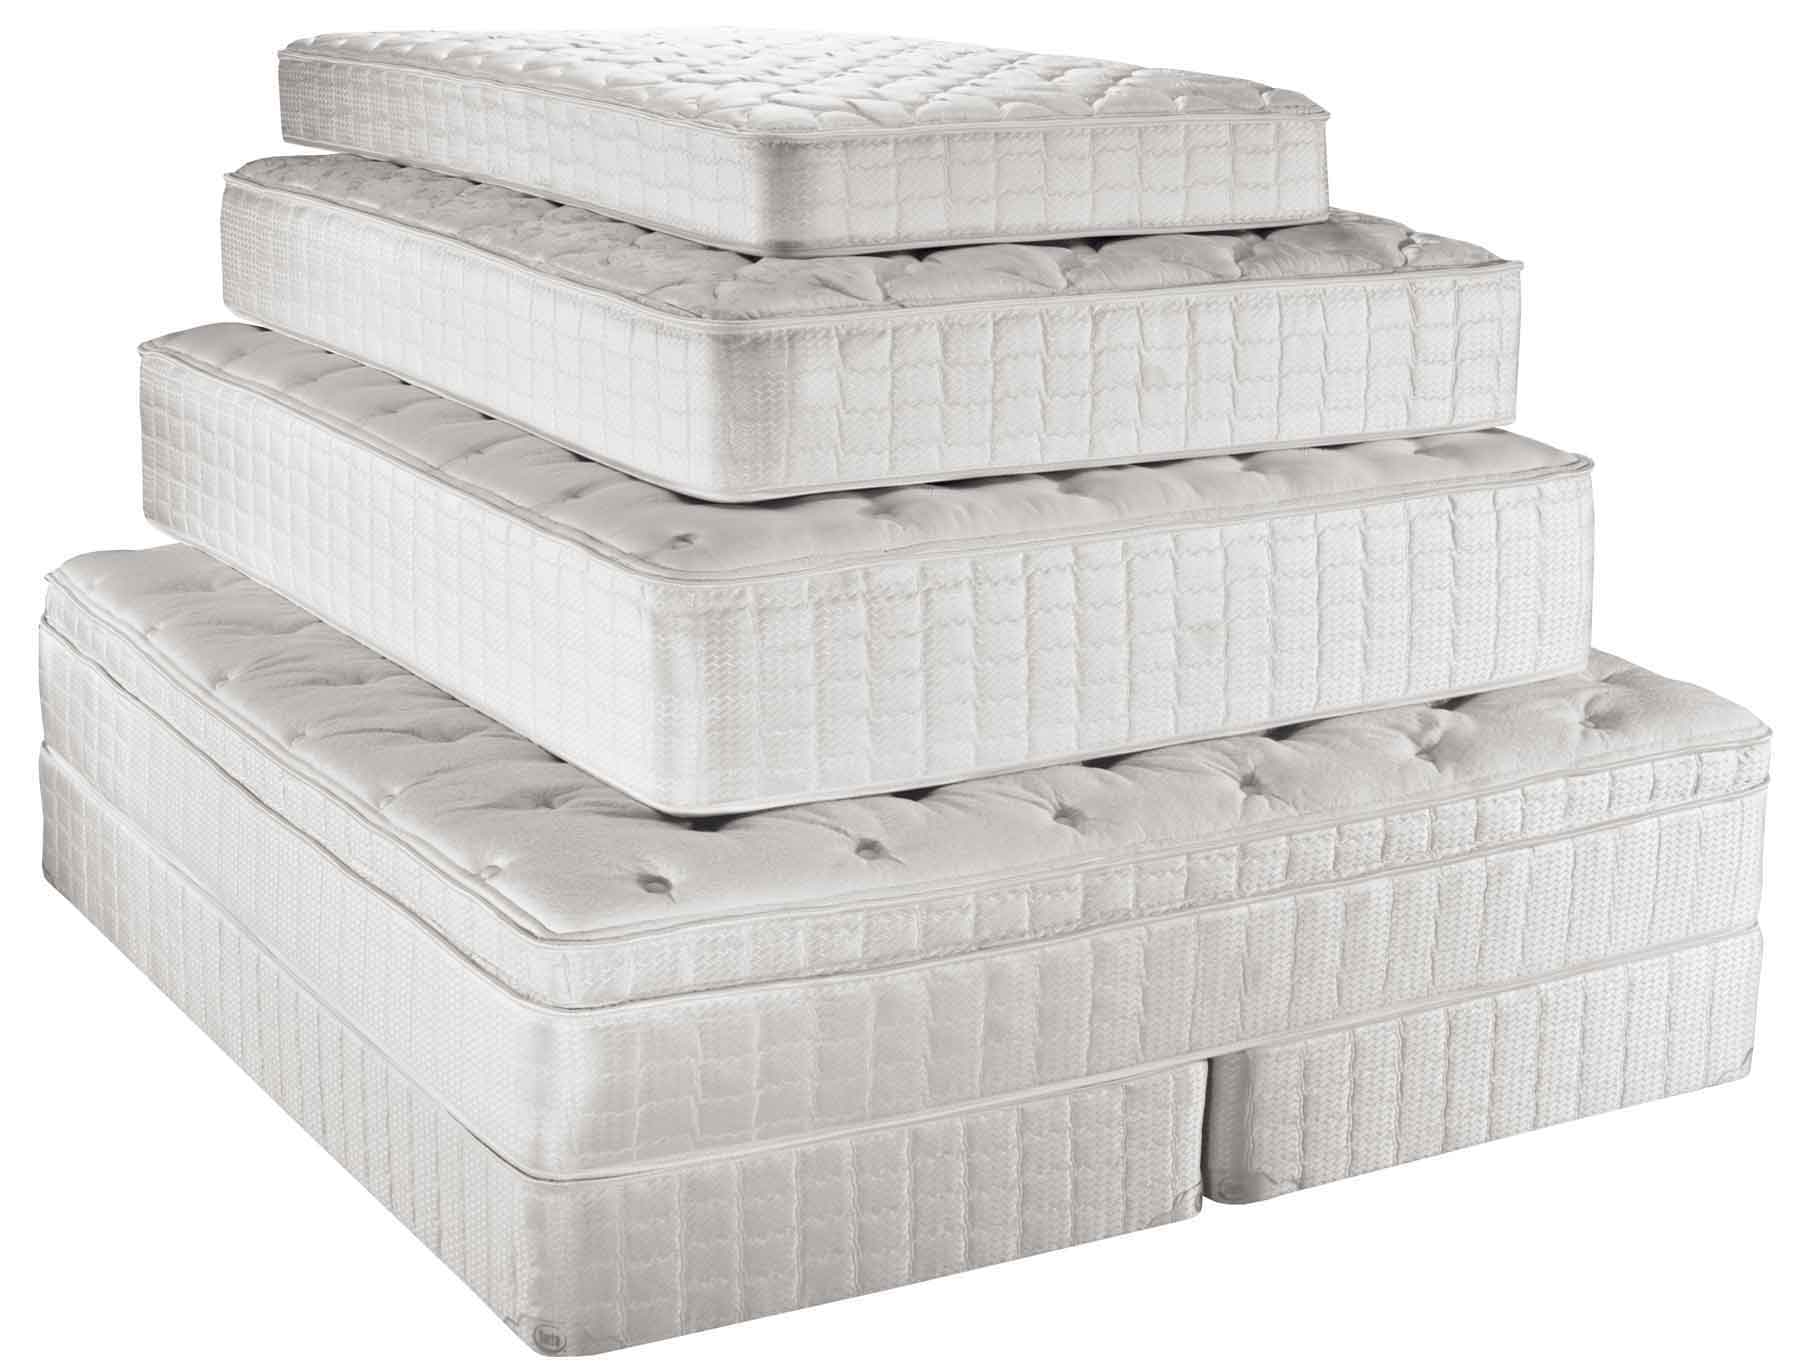 The Lifespan Of A Good, Better, & Best Mattress (Mattress Life Expectancy At All Quality Levels)